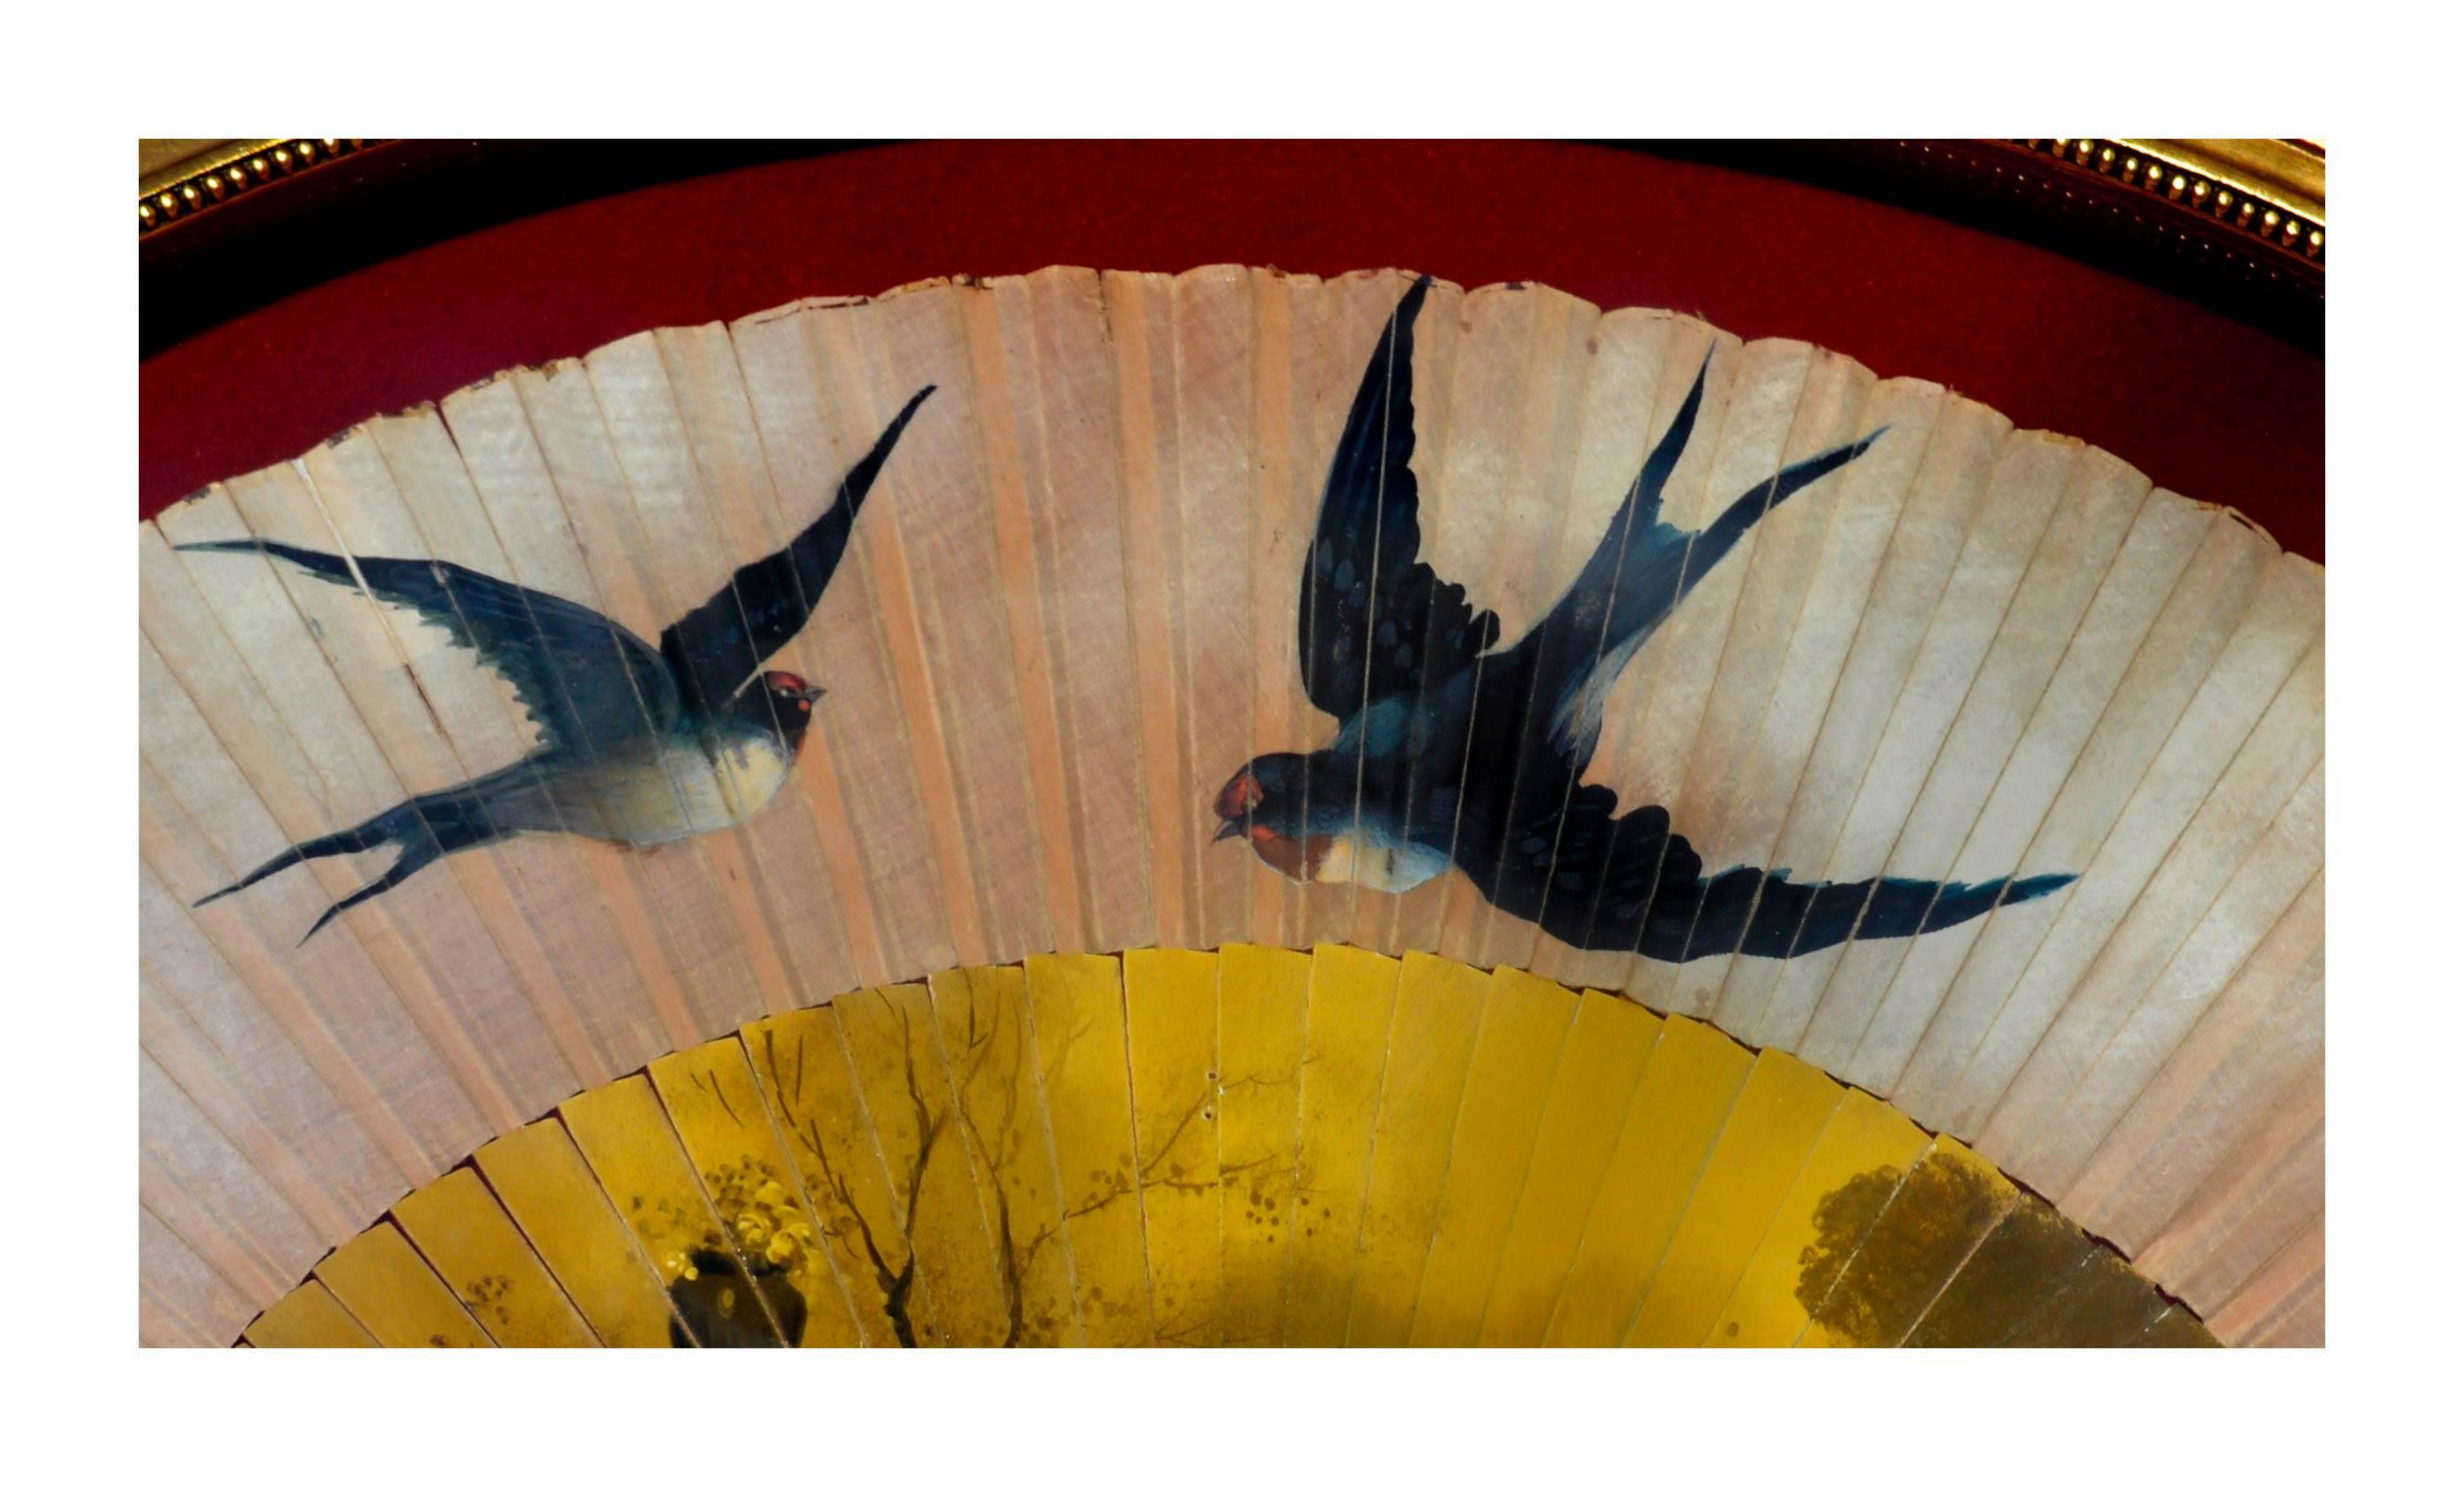 Gorgeous antique hand-painted fan. The bottom of the fan shows faint cherry blossom trees next to a marble base and urn, while the upper part of the fan shows four blue sparrows in flight. Painted circa 1900-1910. (Fan appears to be 19th century